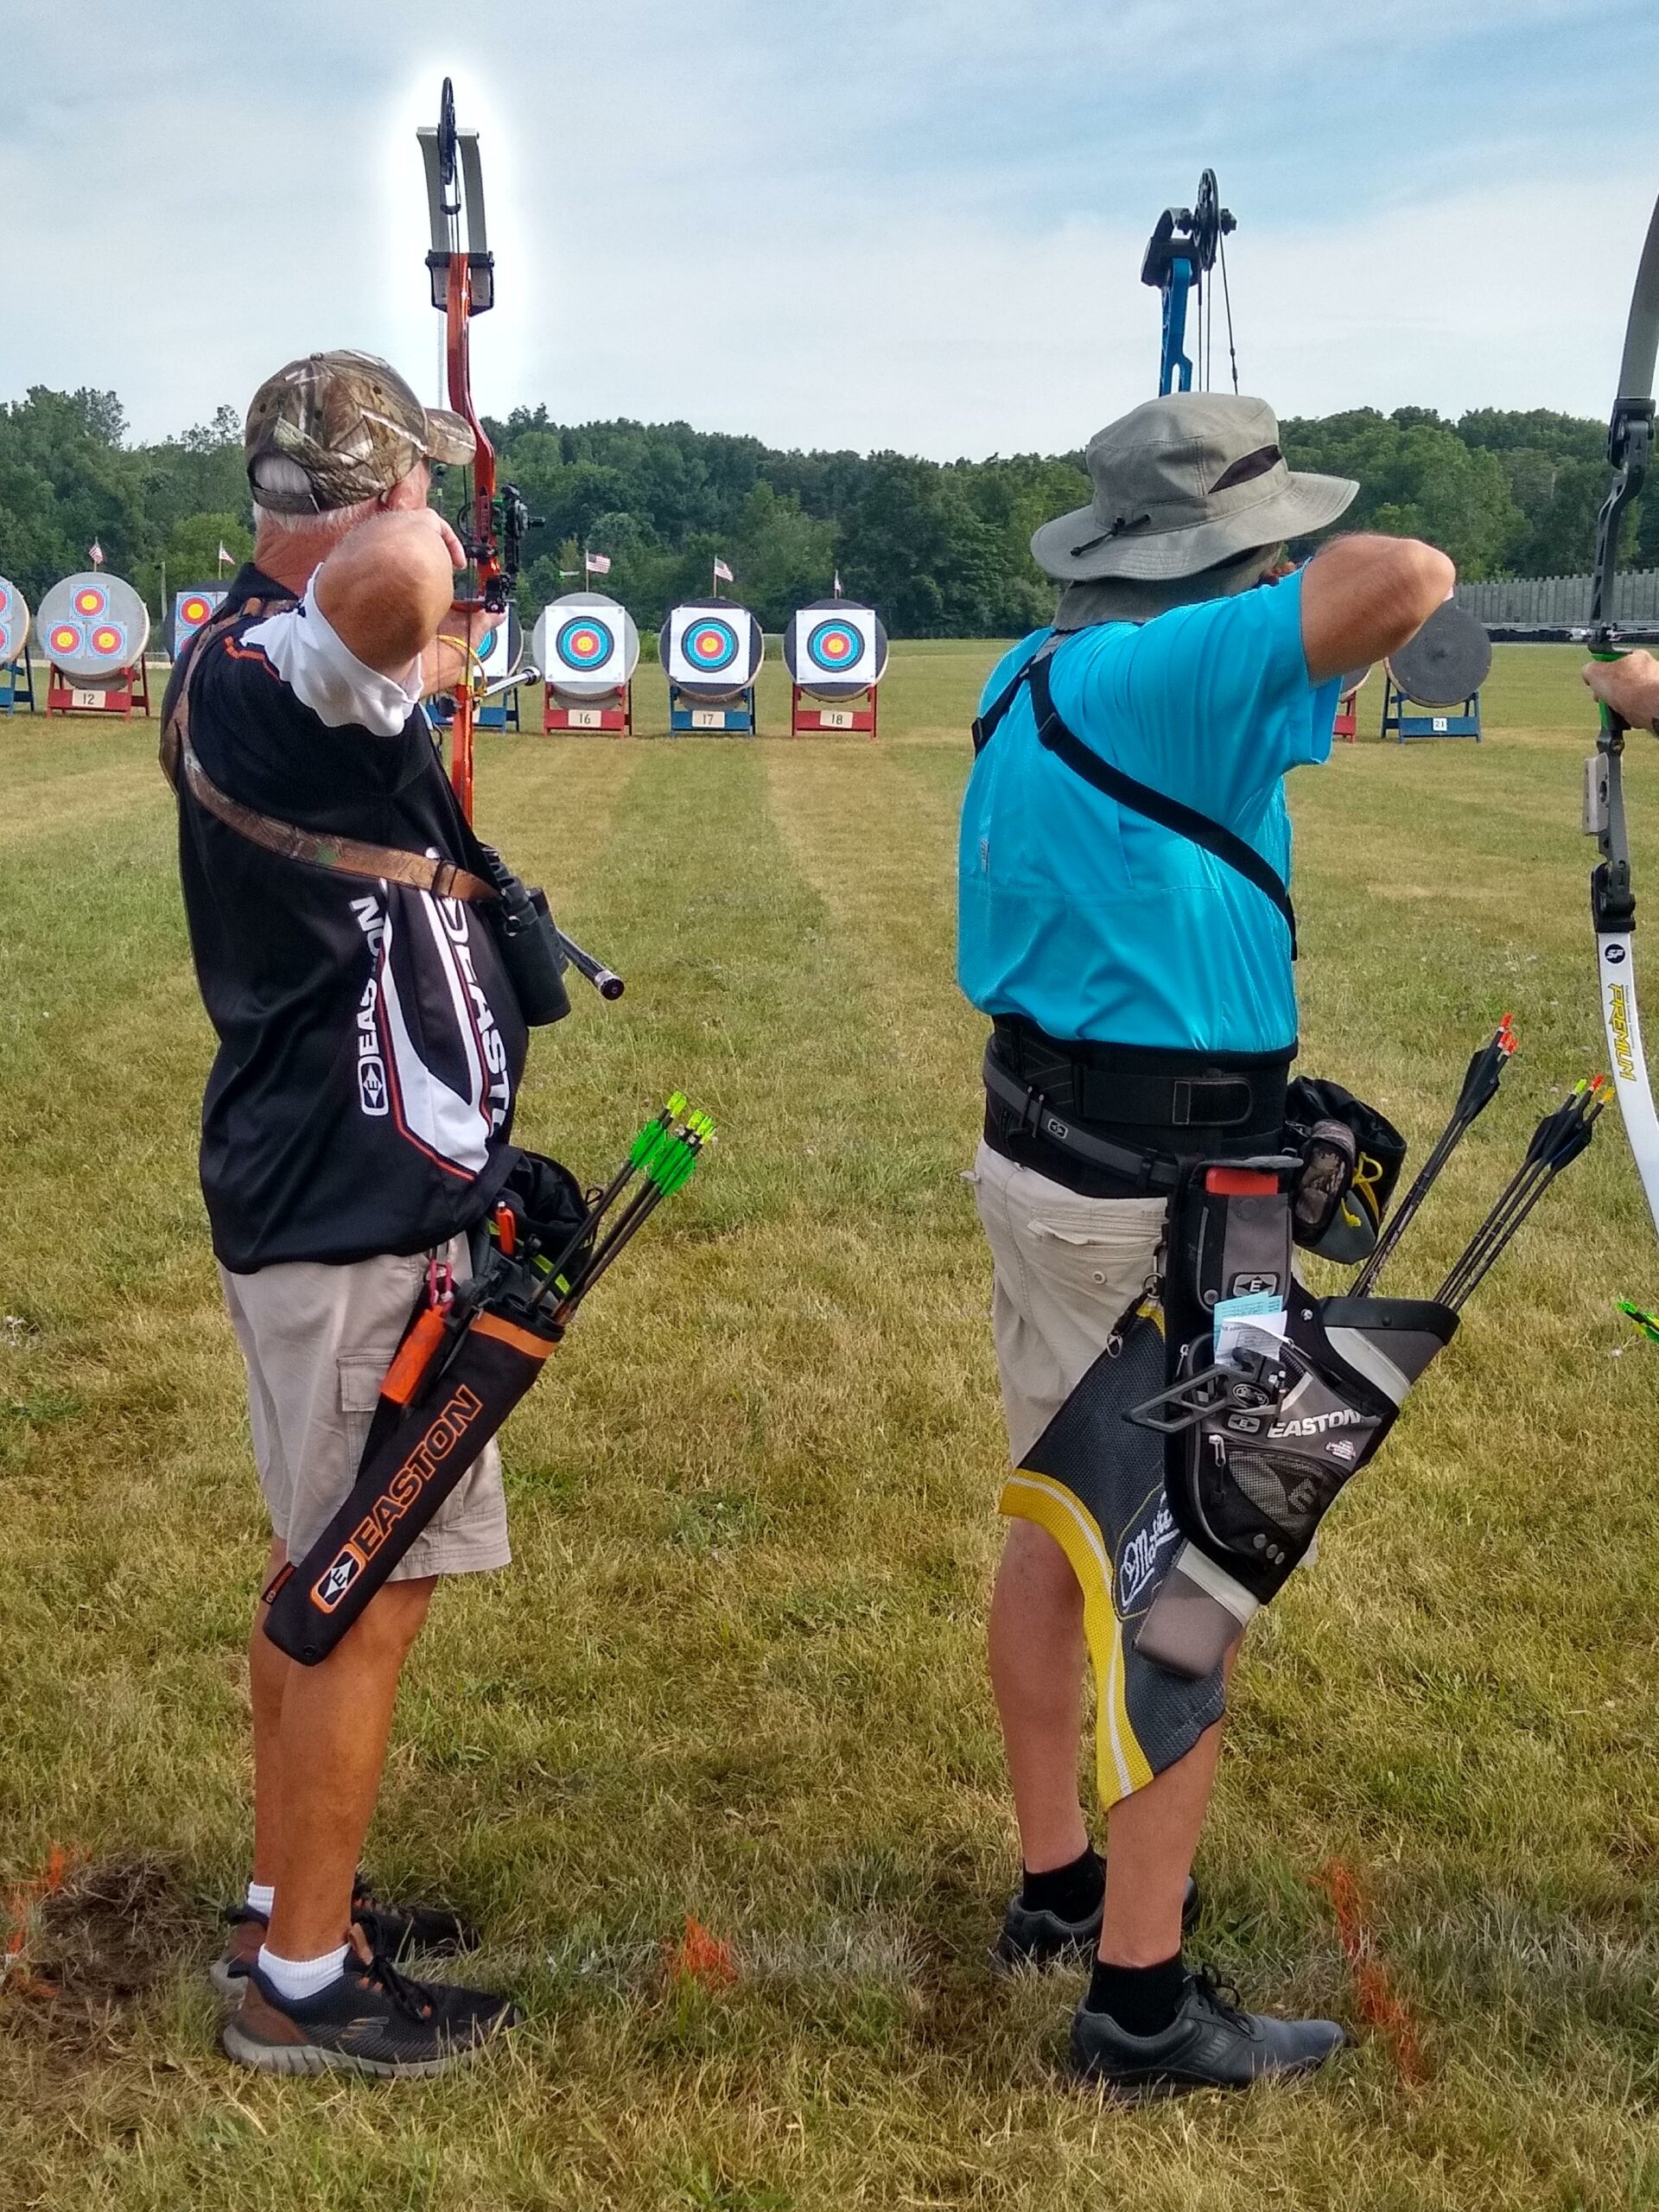 Two participants draw their bows back and aim to shoot the target.